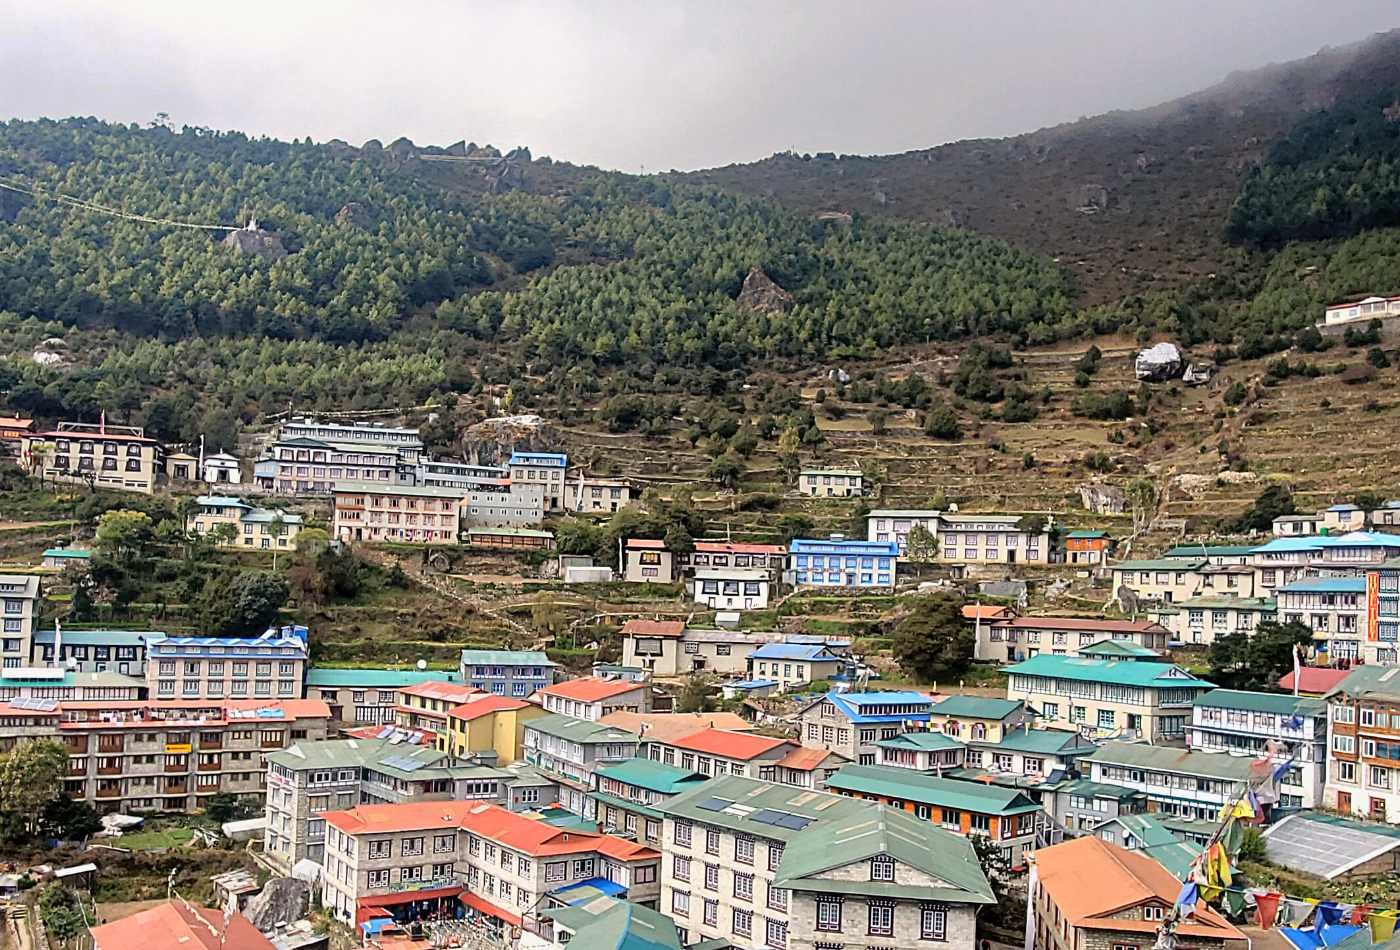 A view of Namche Bazaar, a colorful Himalayas village with a traditional rooftop decorated with prayer flags and surrounded by green hills.